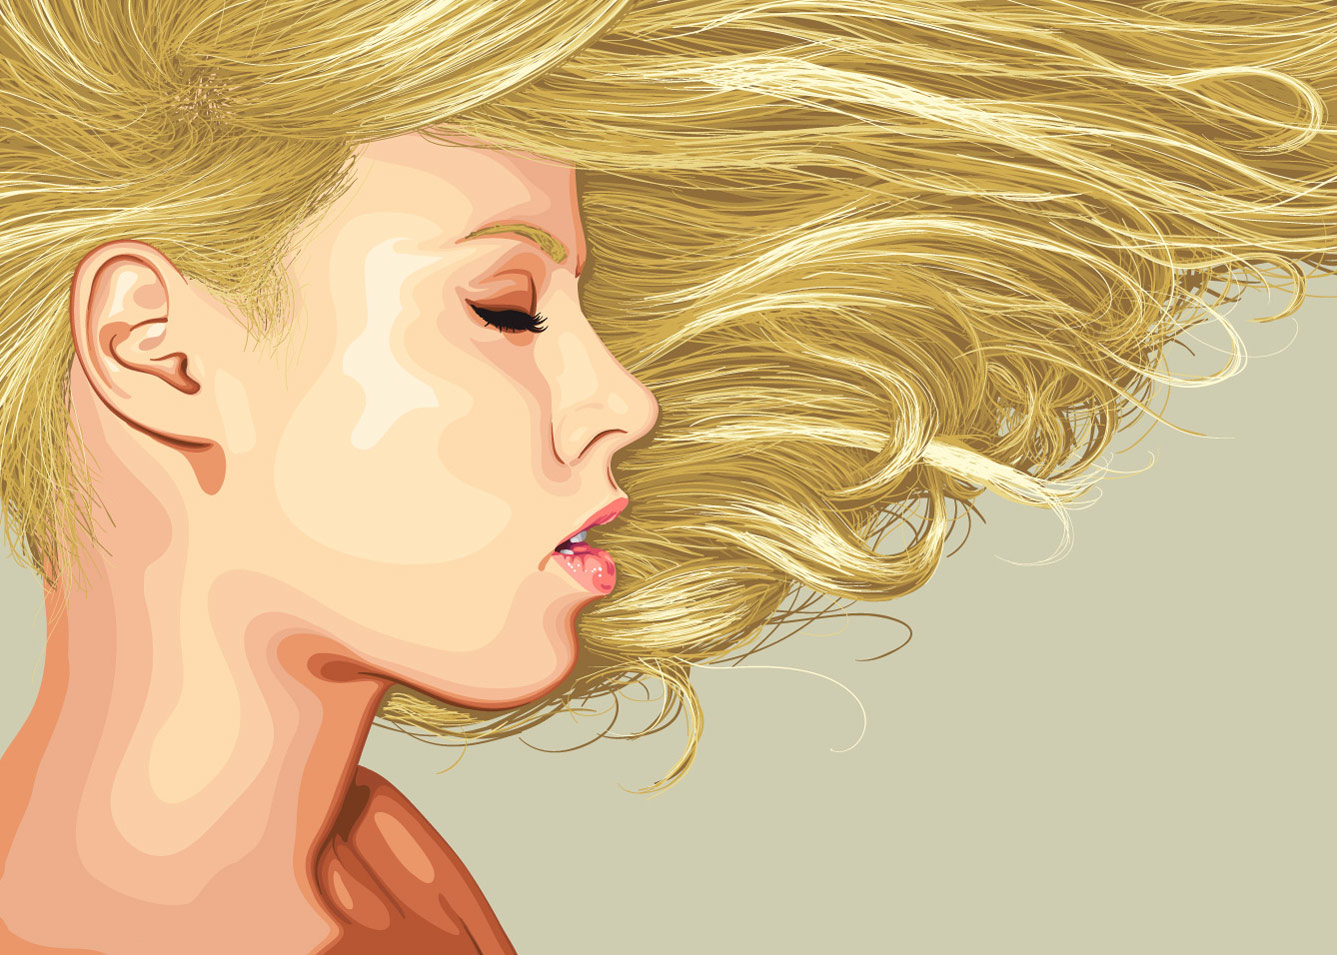 Girl with blonde hair by gnyp on DeviantArt